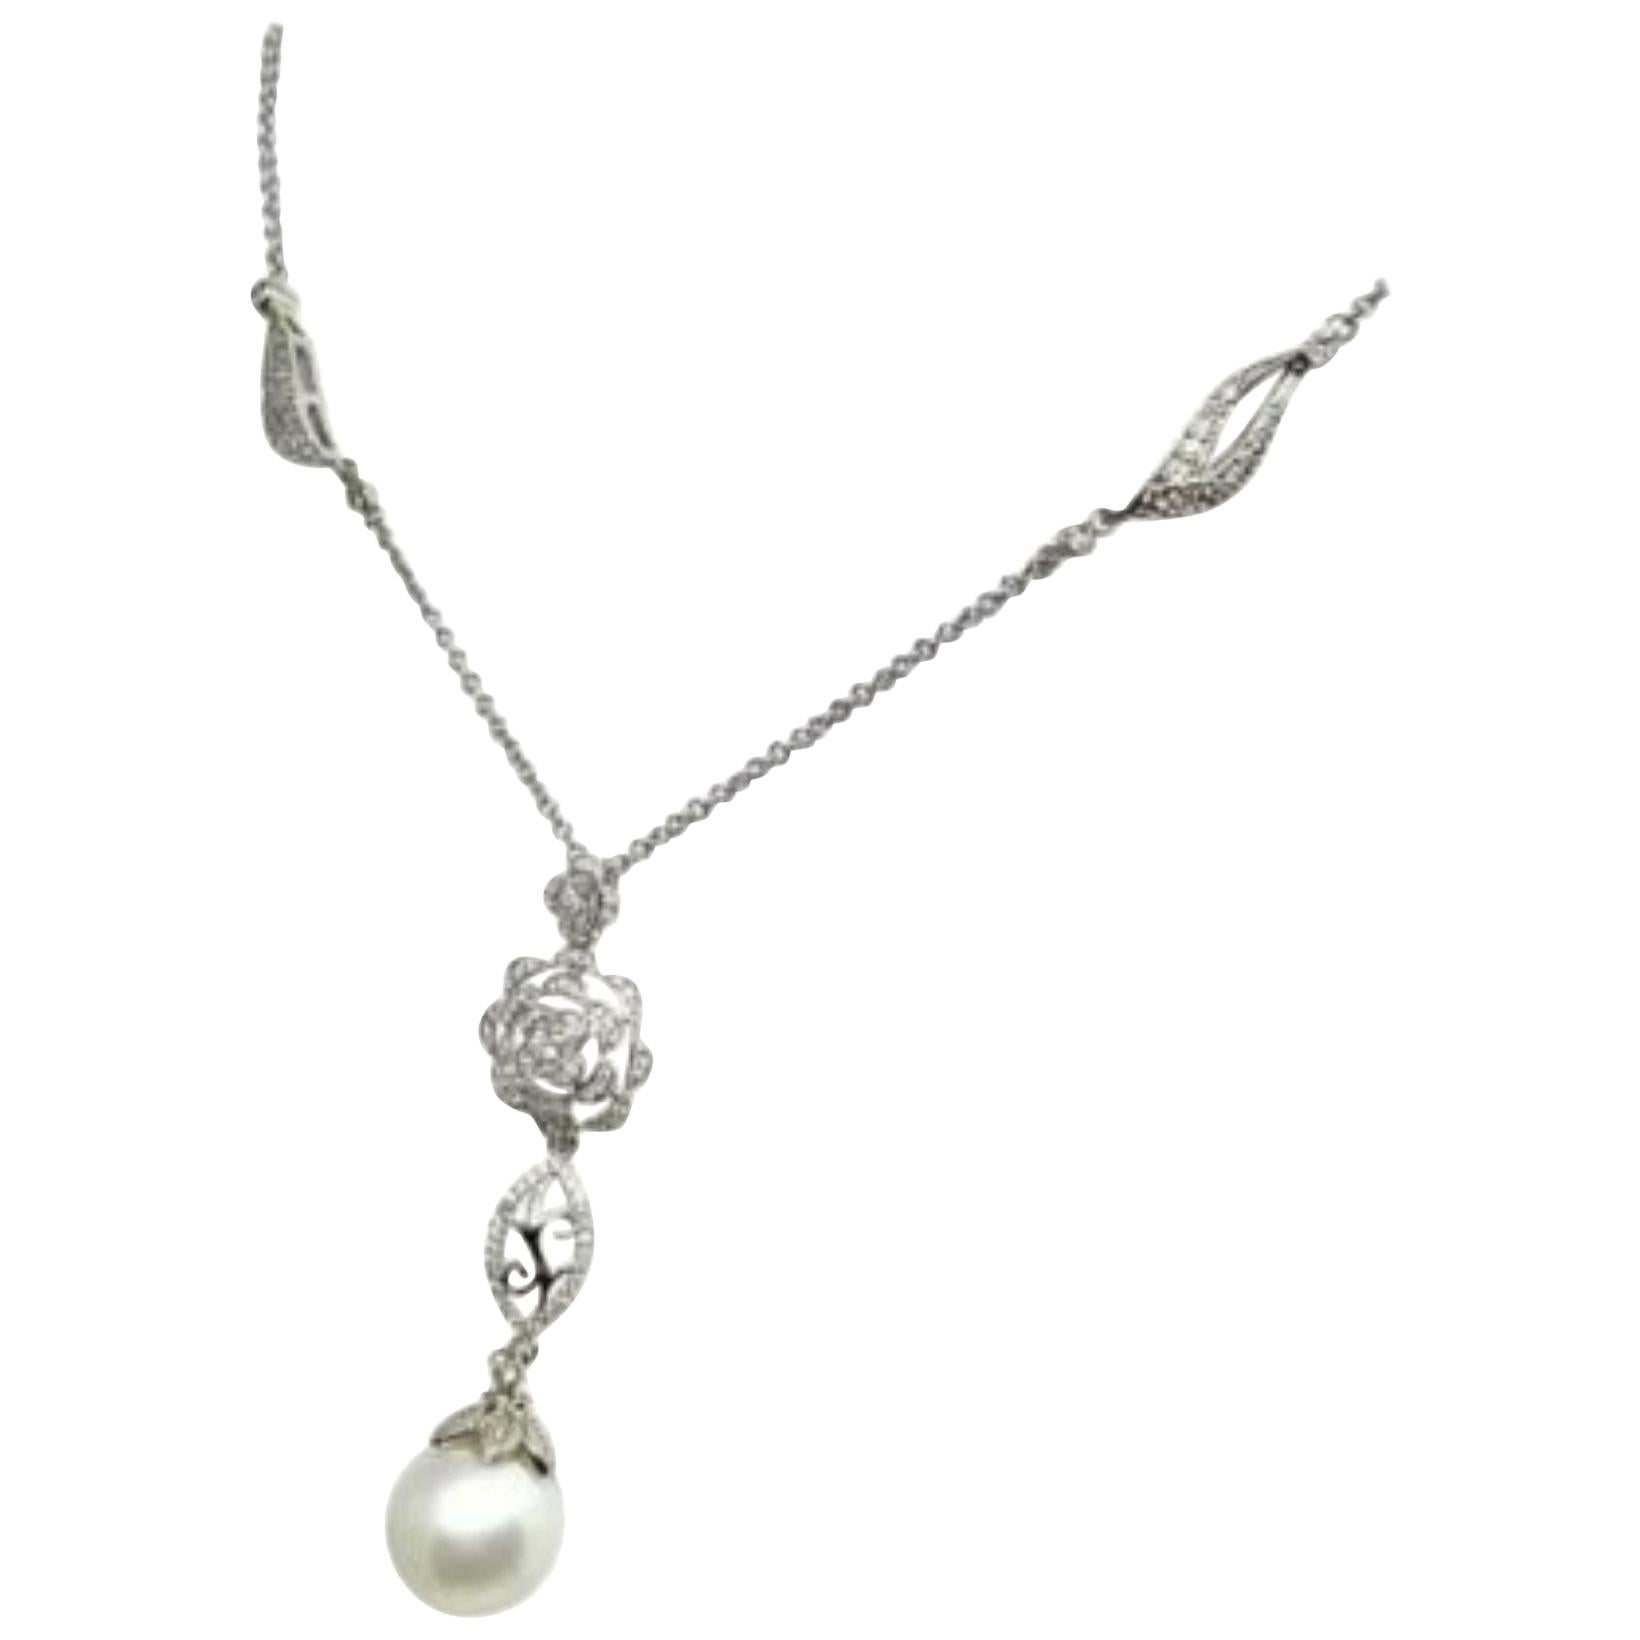 Diamond South Sea Pearl Necklace 14k Gold Certified For Sale